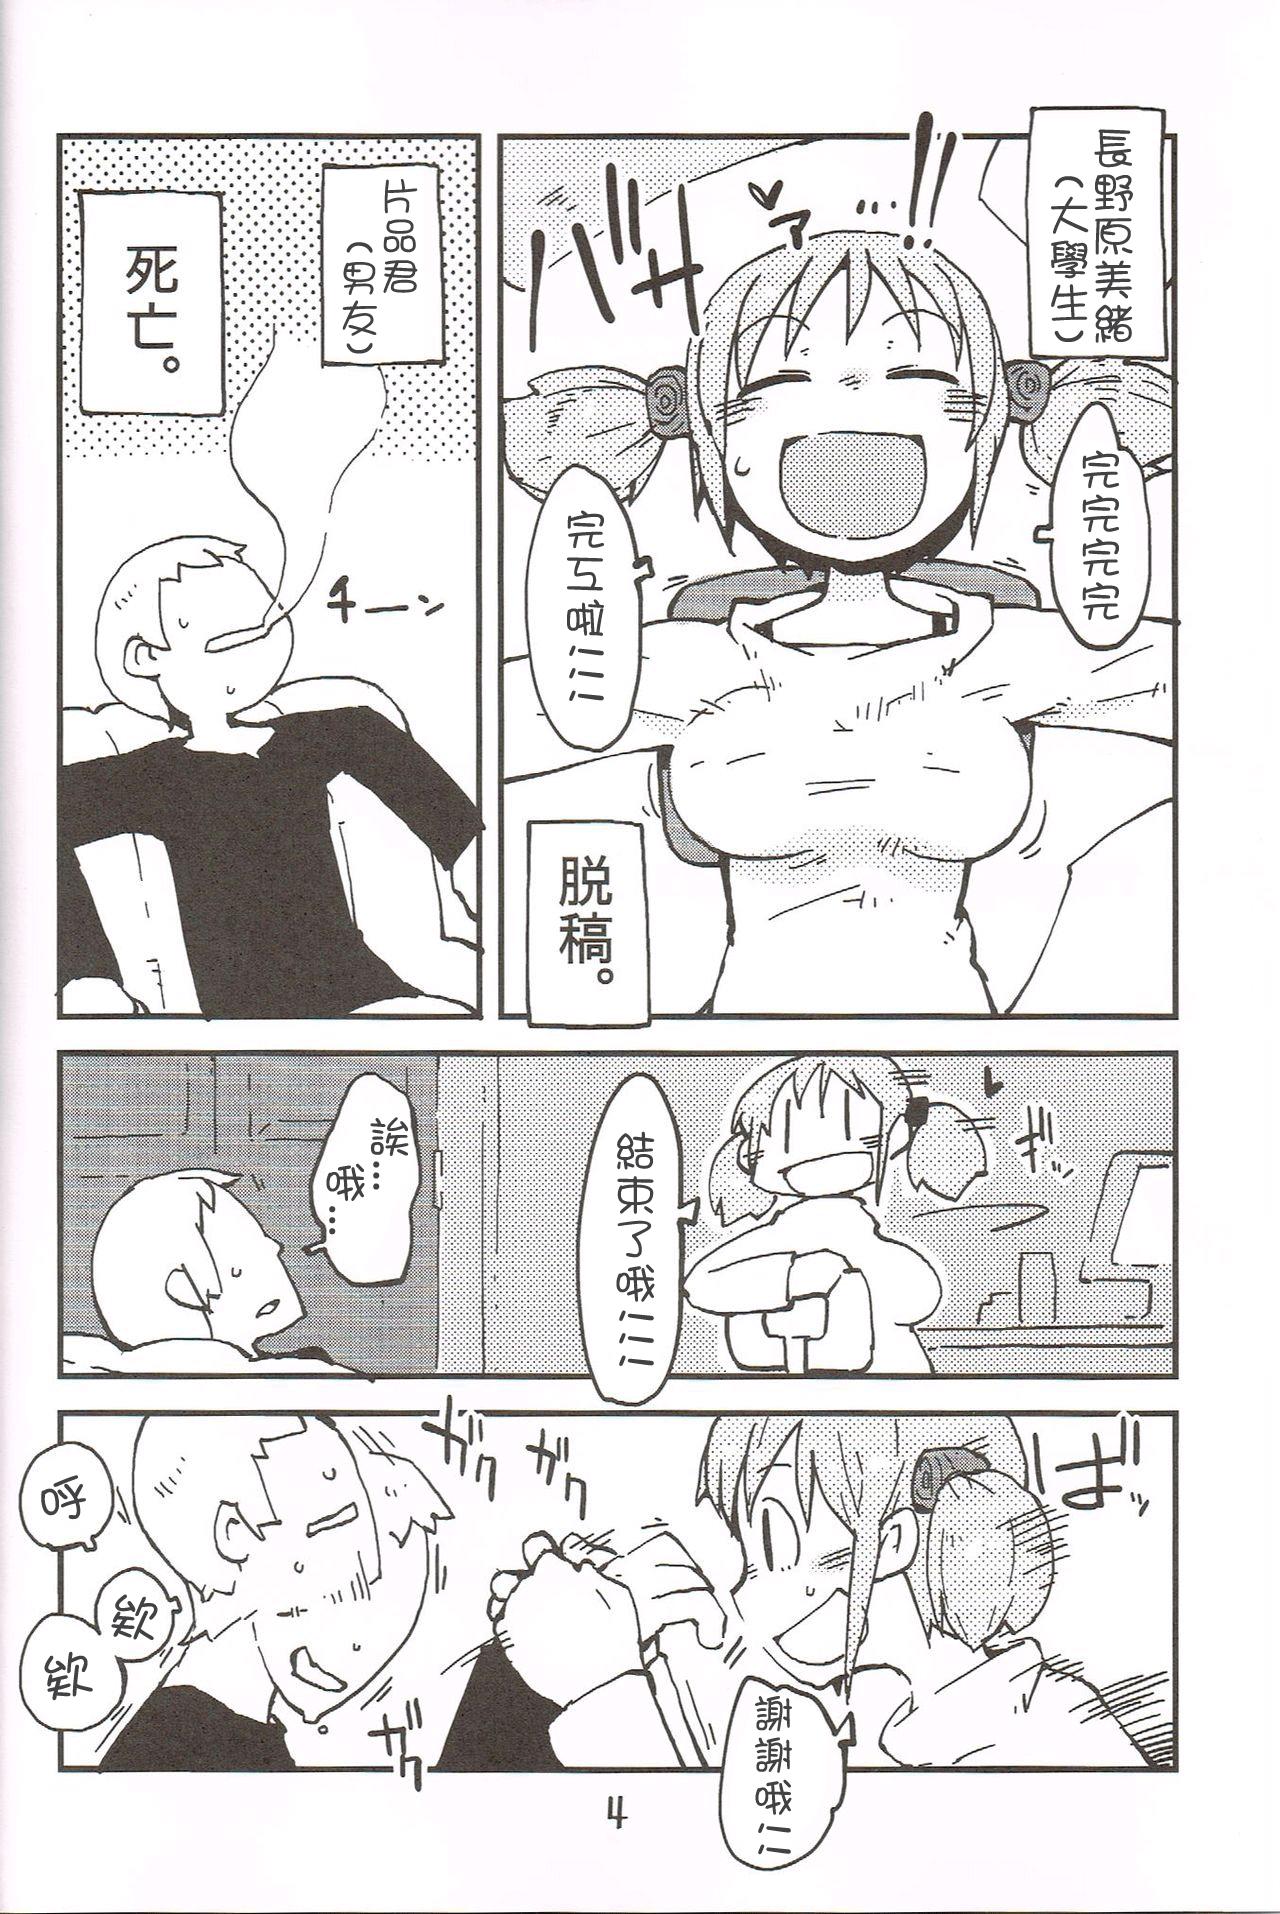 Free 18 Year Old Porn Foamy Love For you. - Nichijou Mature Woman - Page 4